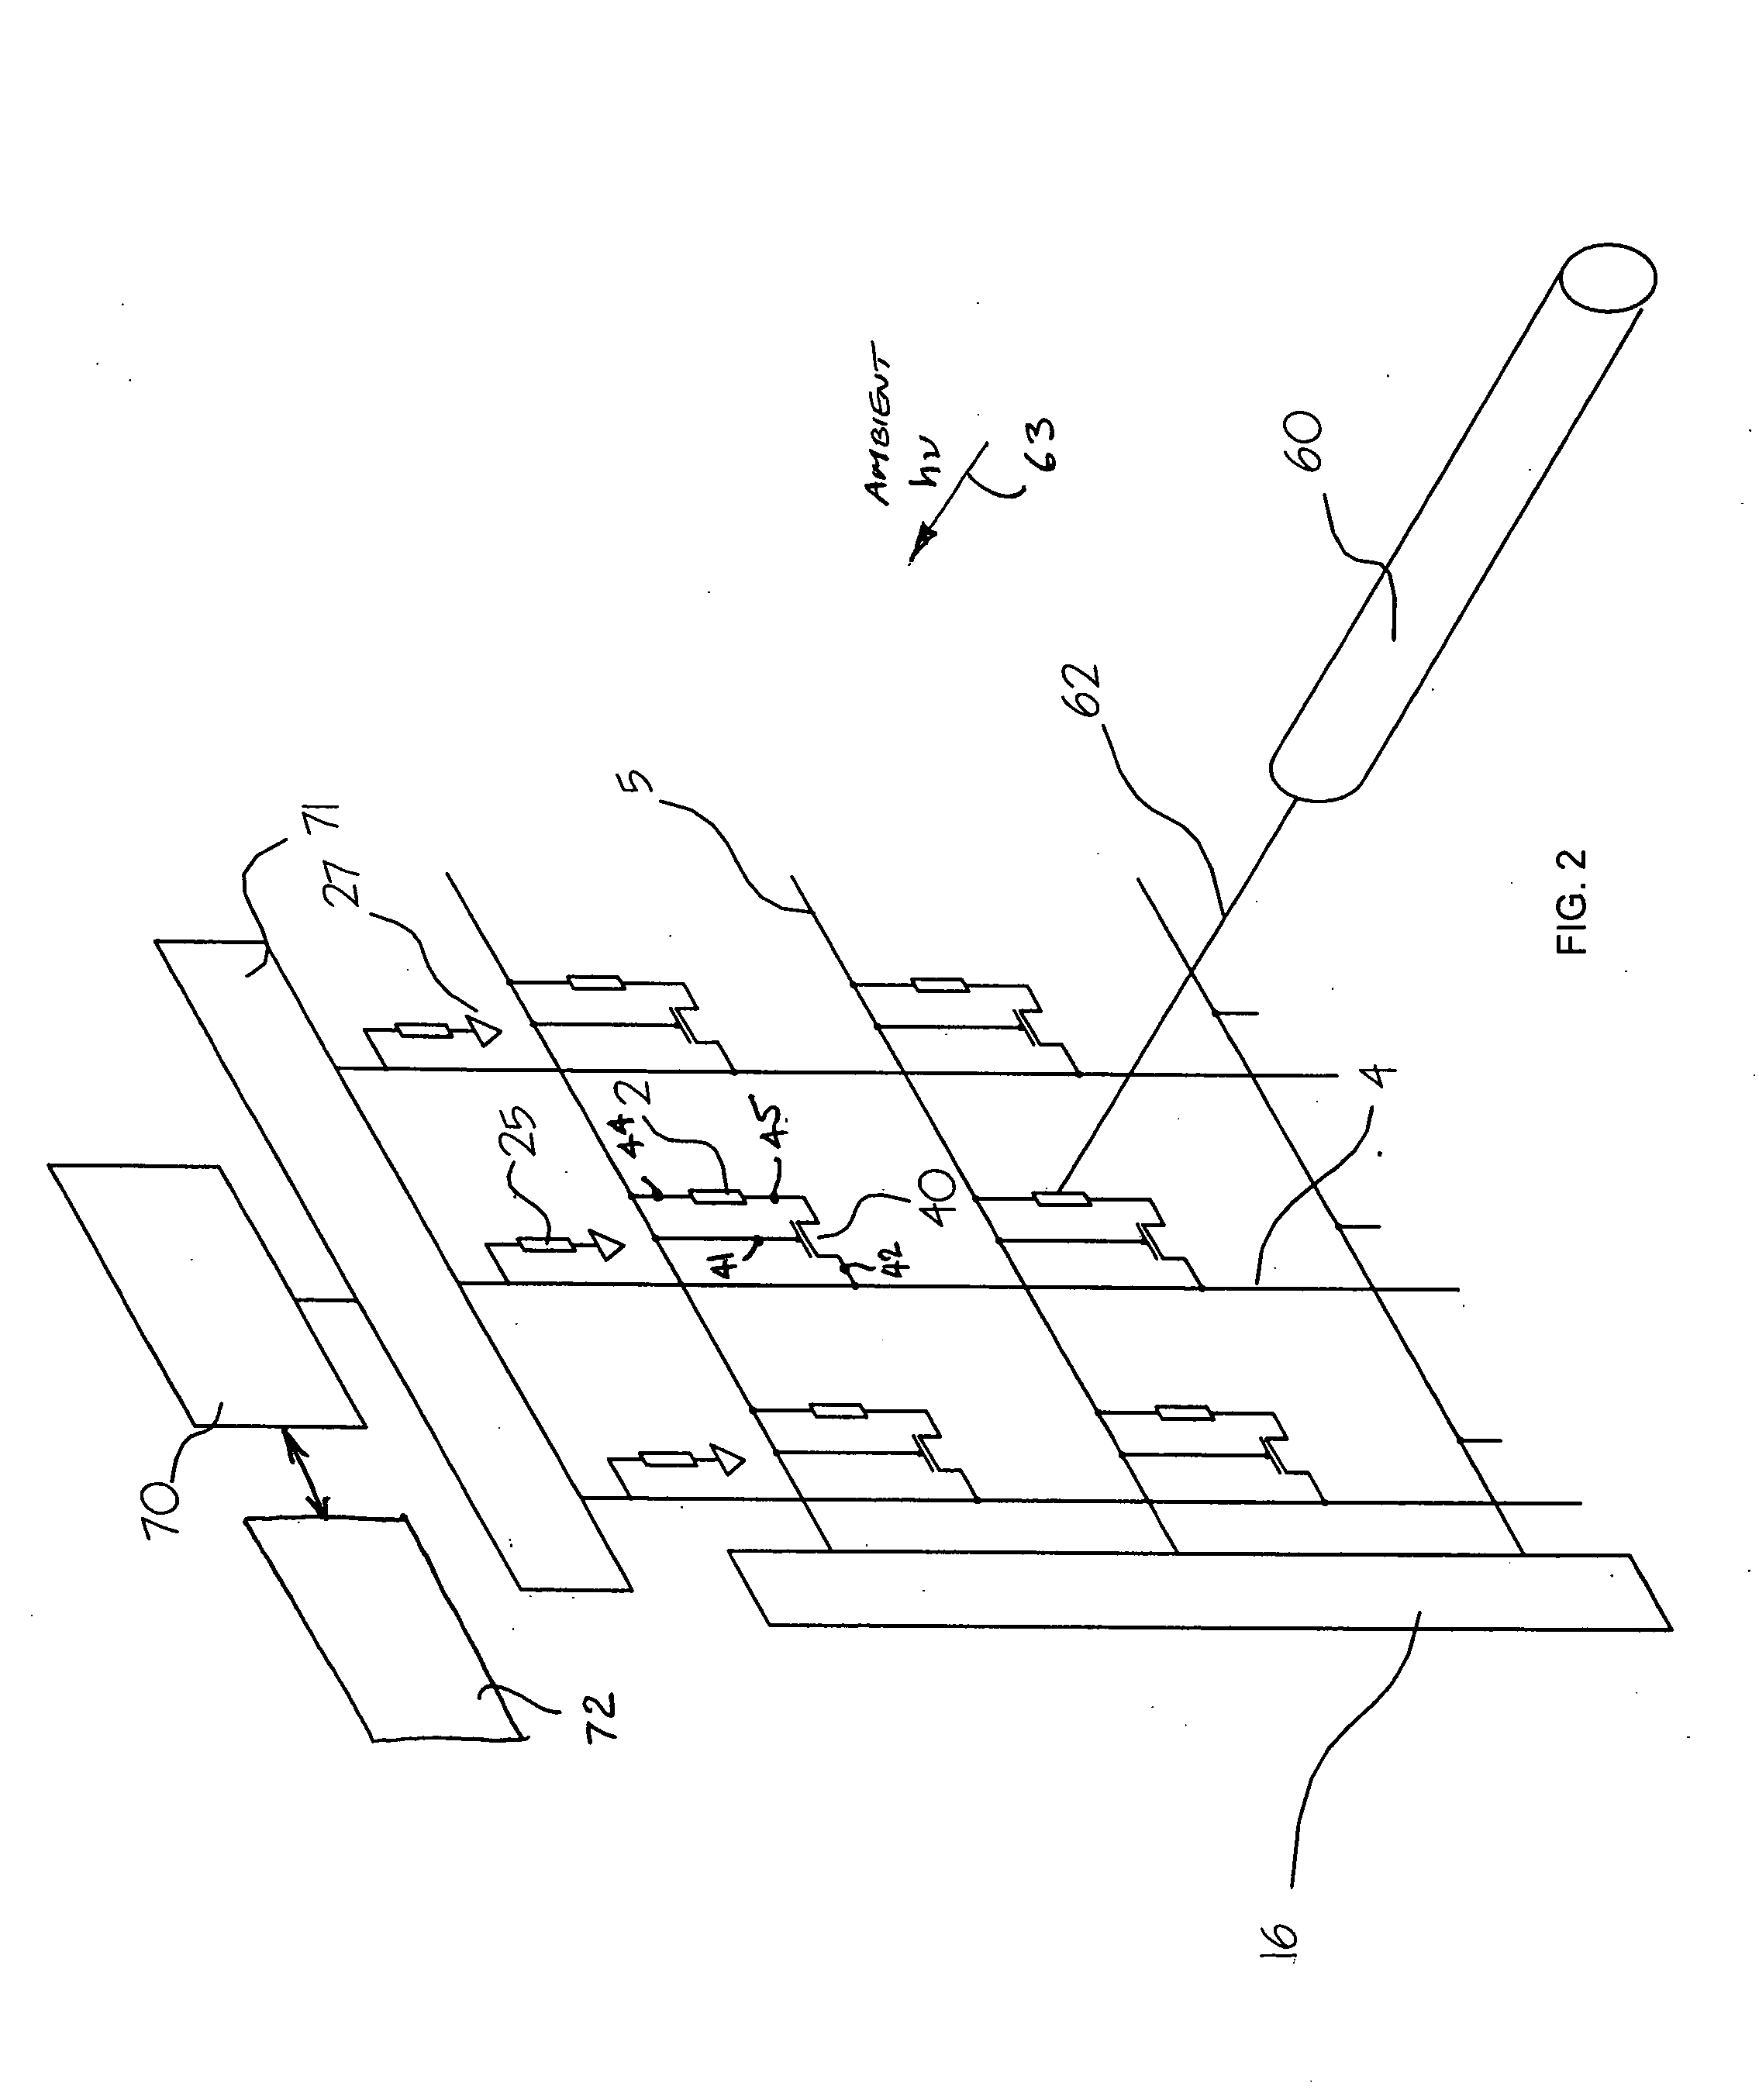 Emissive display device having sensing for luminance stabilization and user light or touch screen input